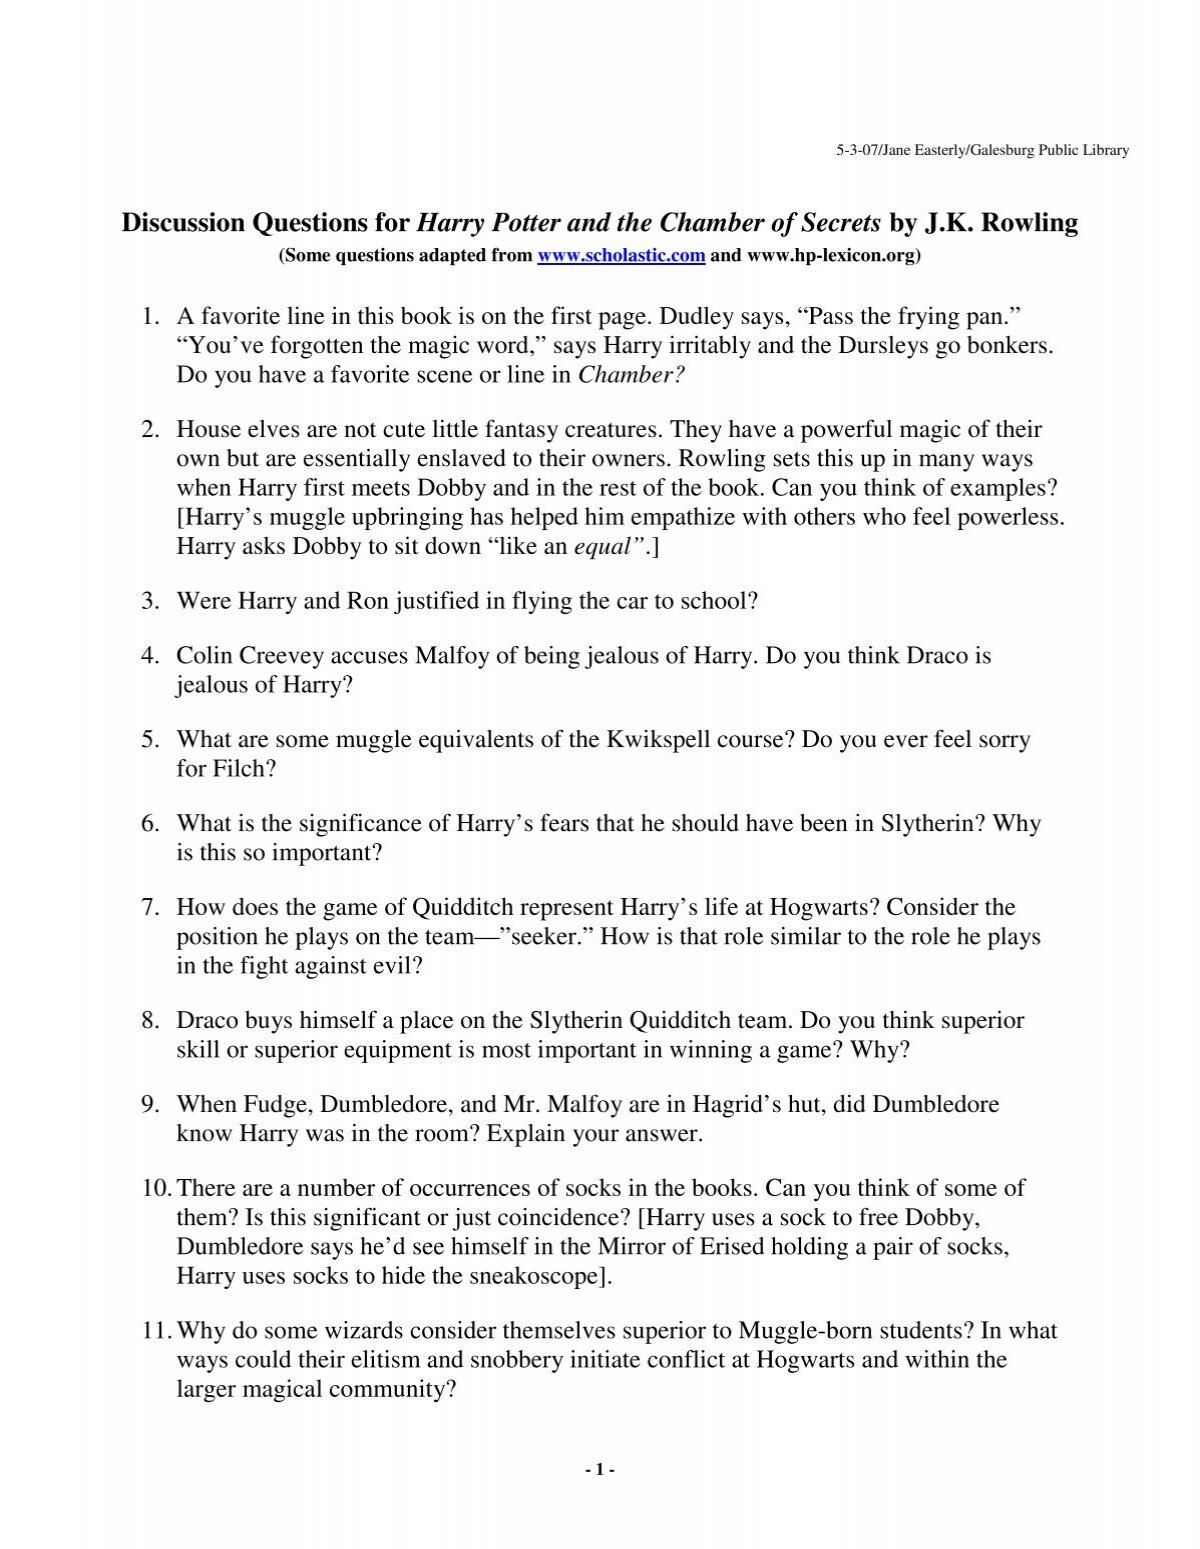 essay questions for harry potter and the chamber of secrets